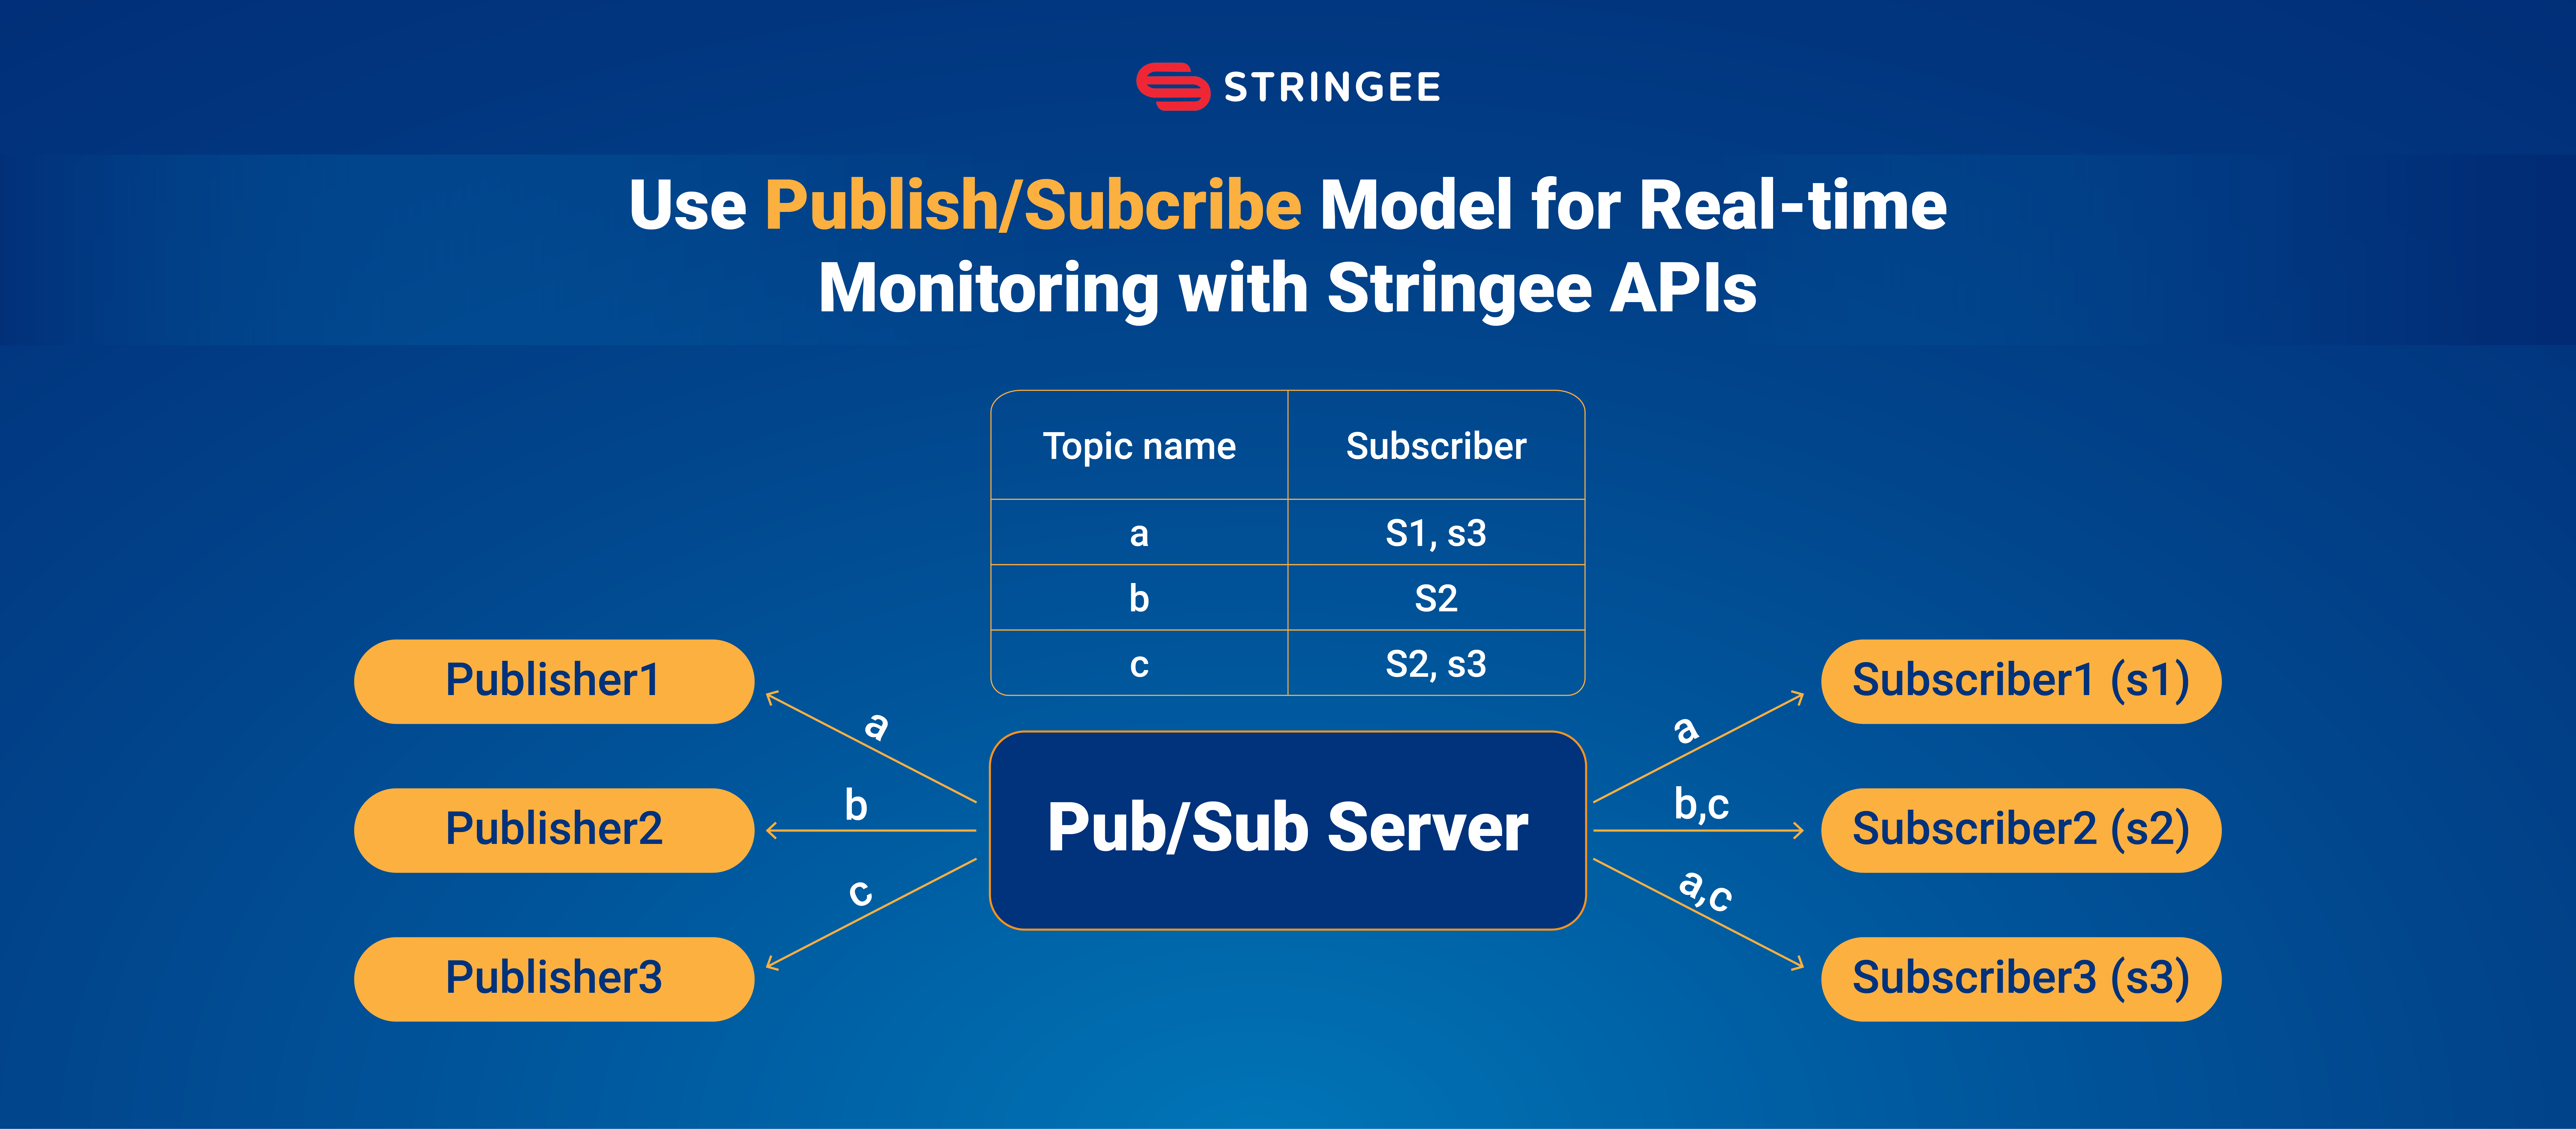 Use Publish/Subcribe Model for Real-time Monitoring with Stringee APIs